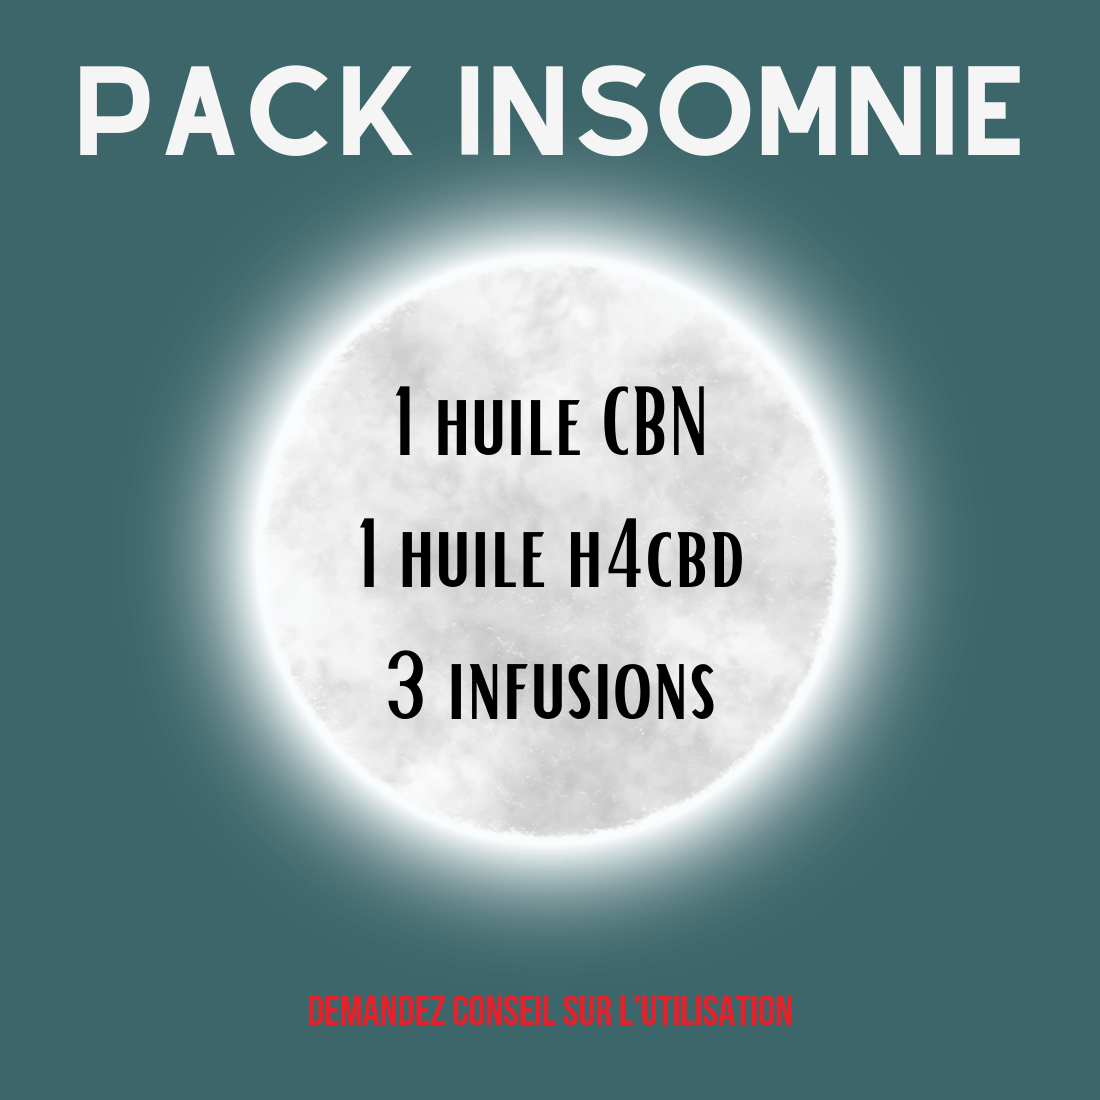 Pack insomnie puissante